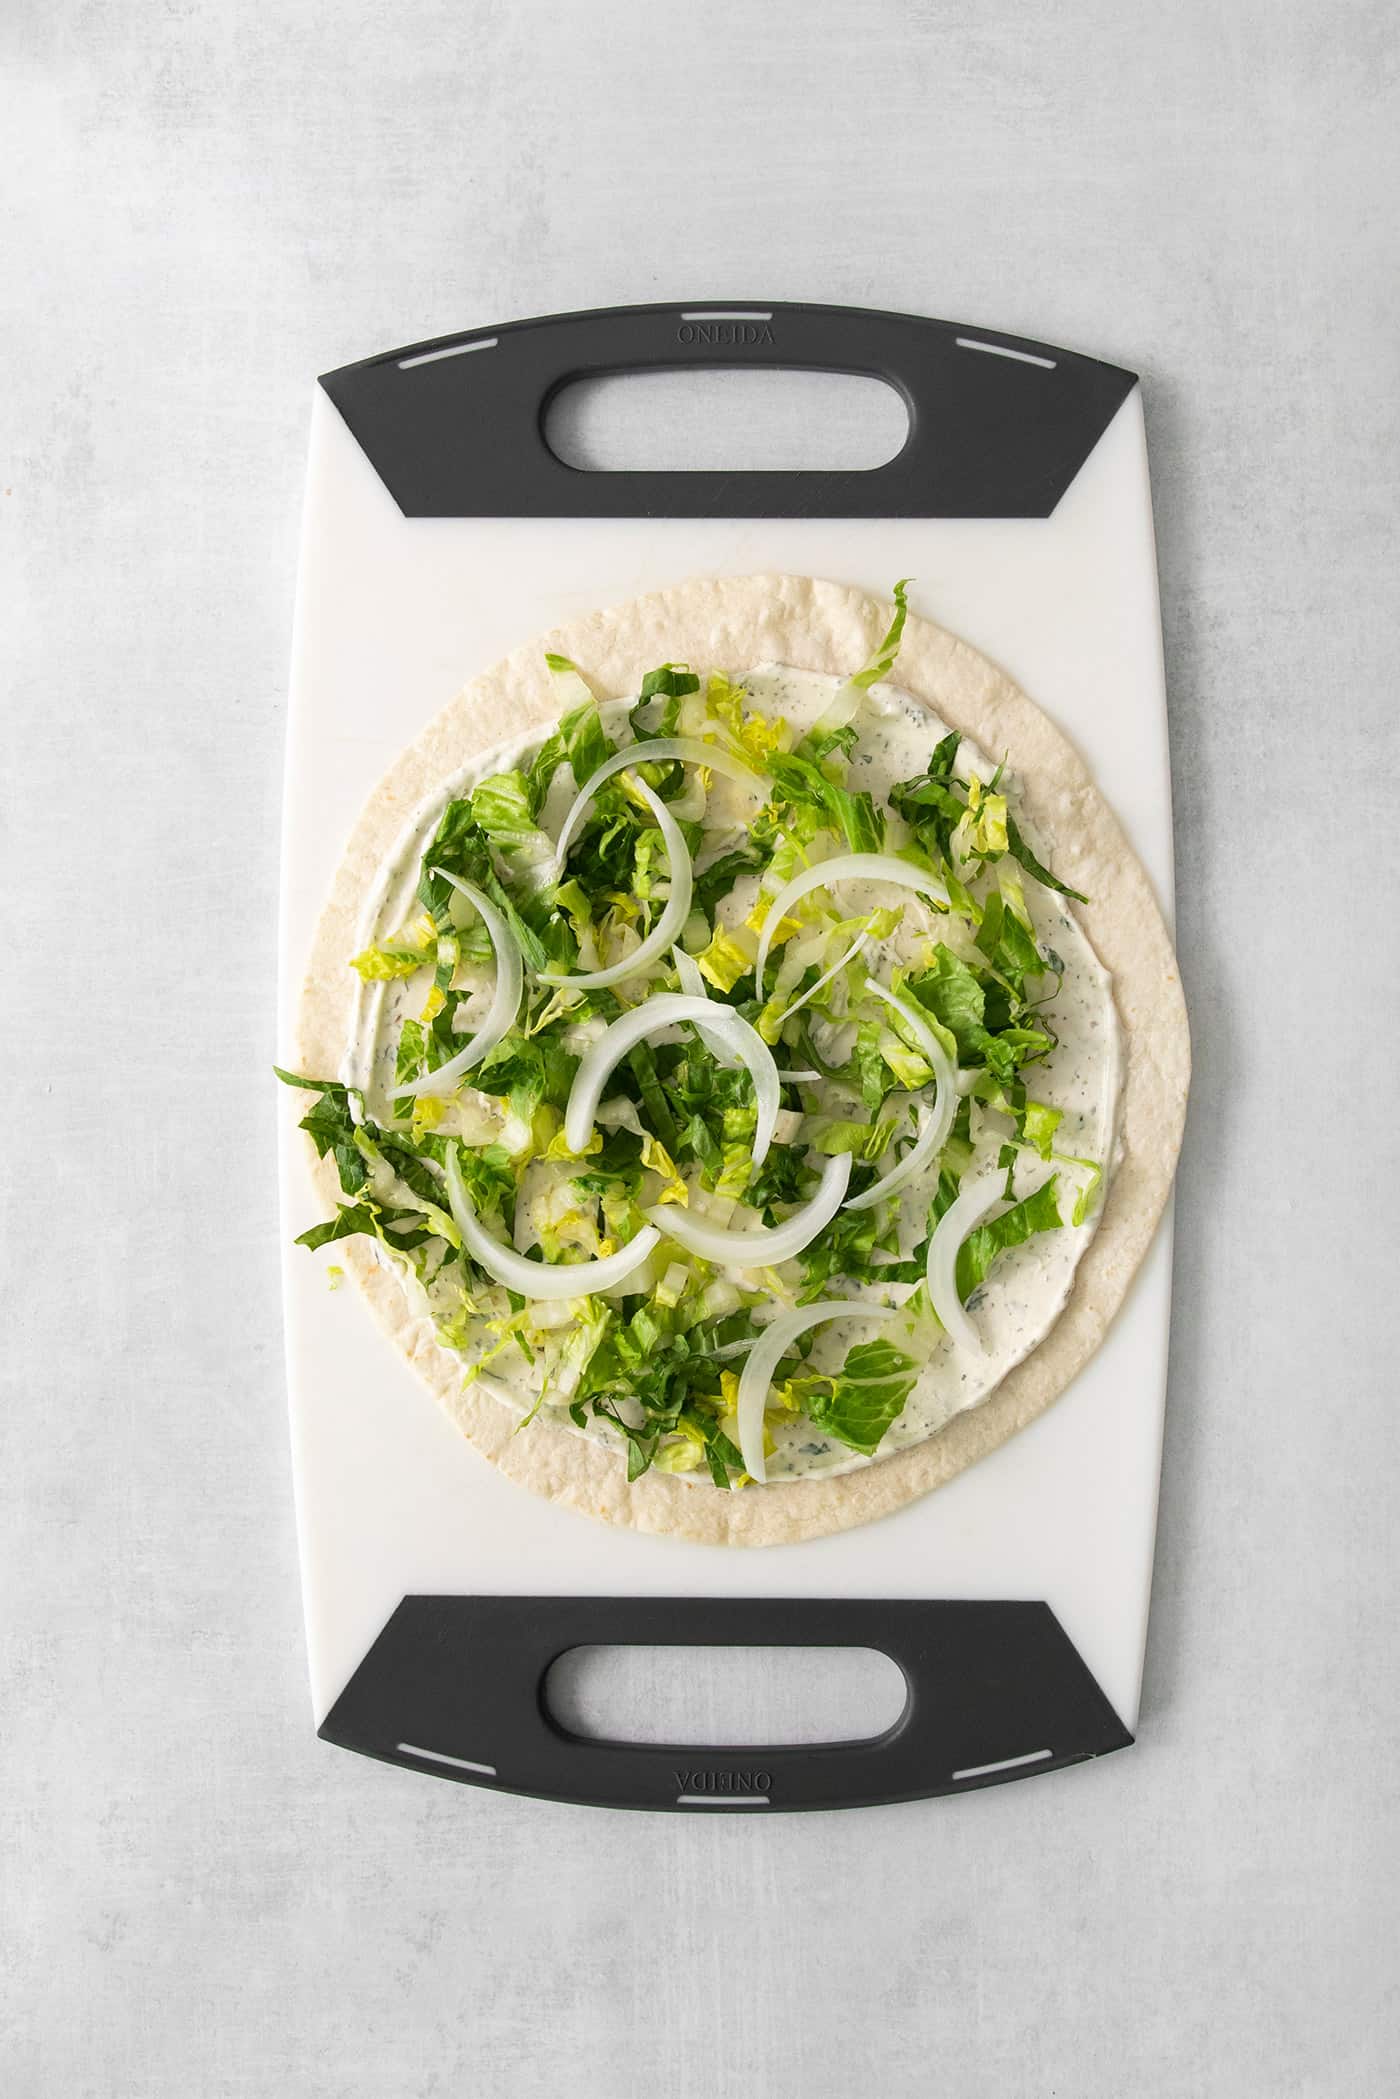 Now chopped lettuce and onion are added to the tortilla on a cutting board.